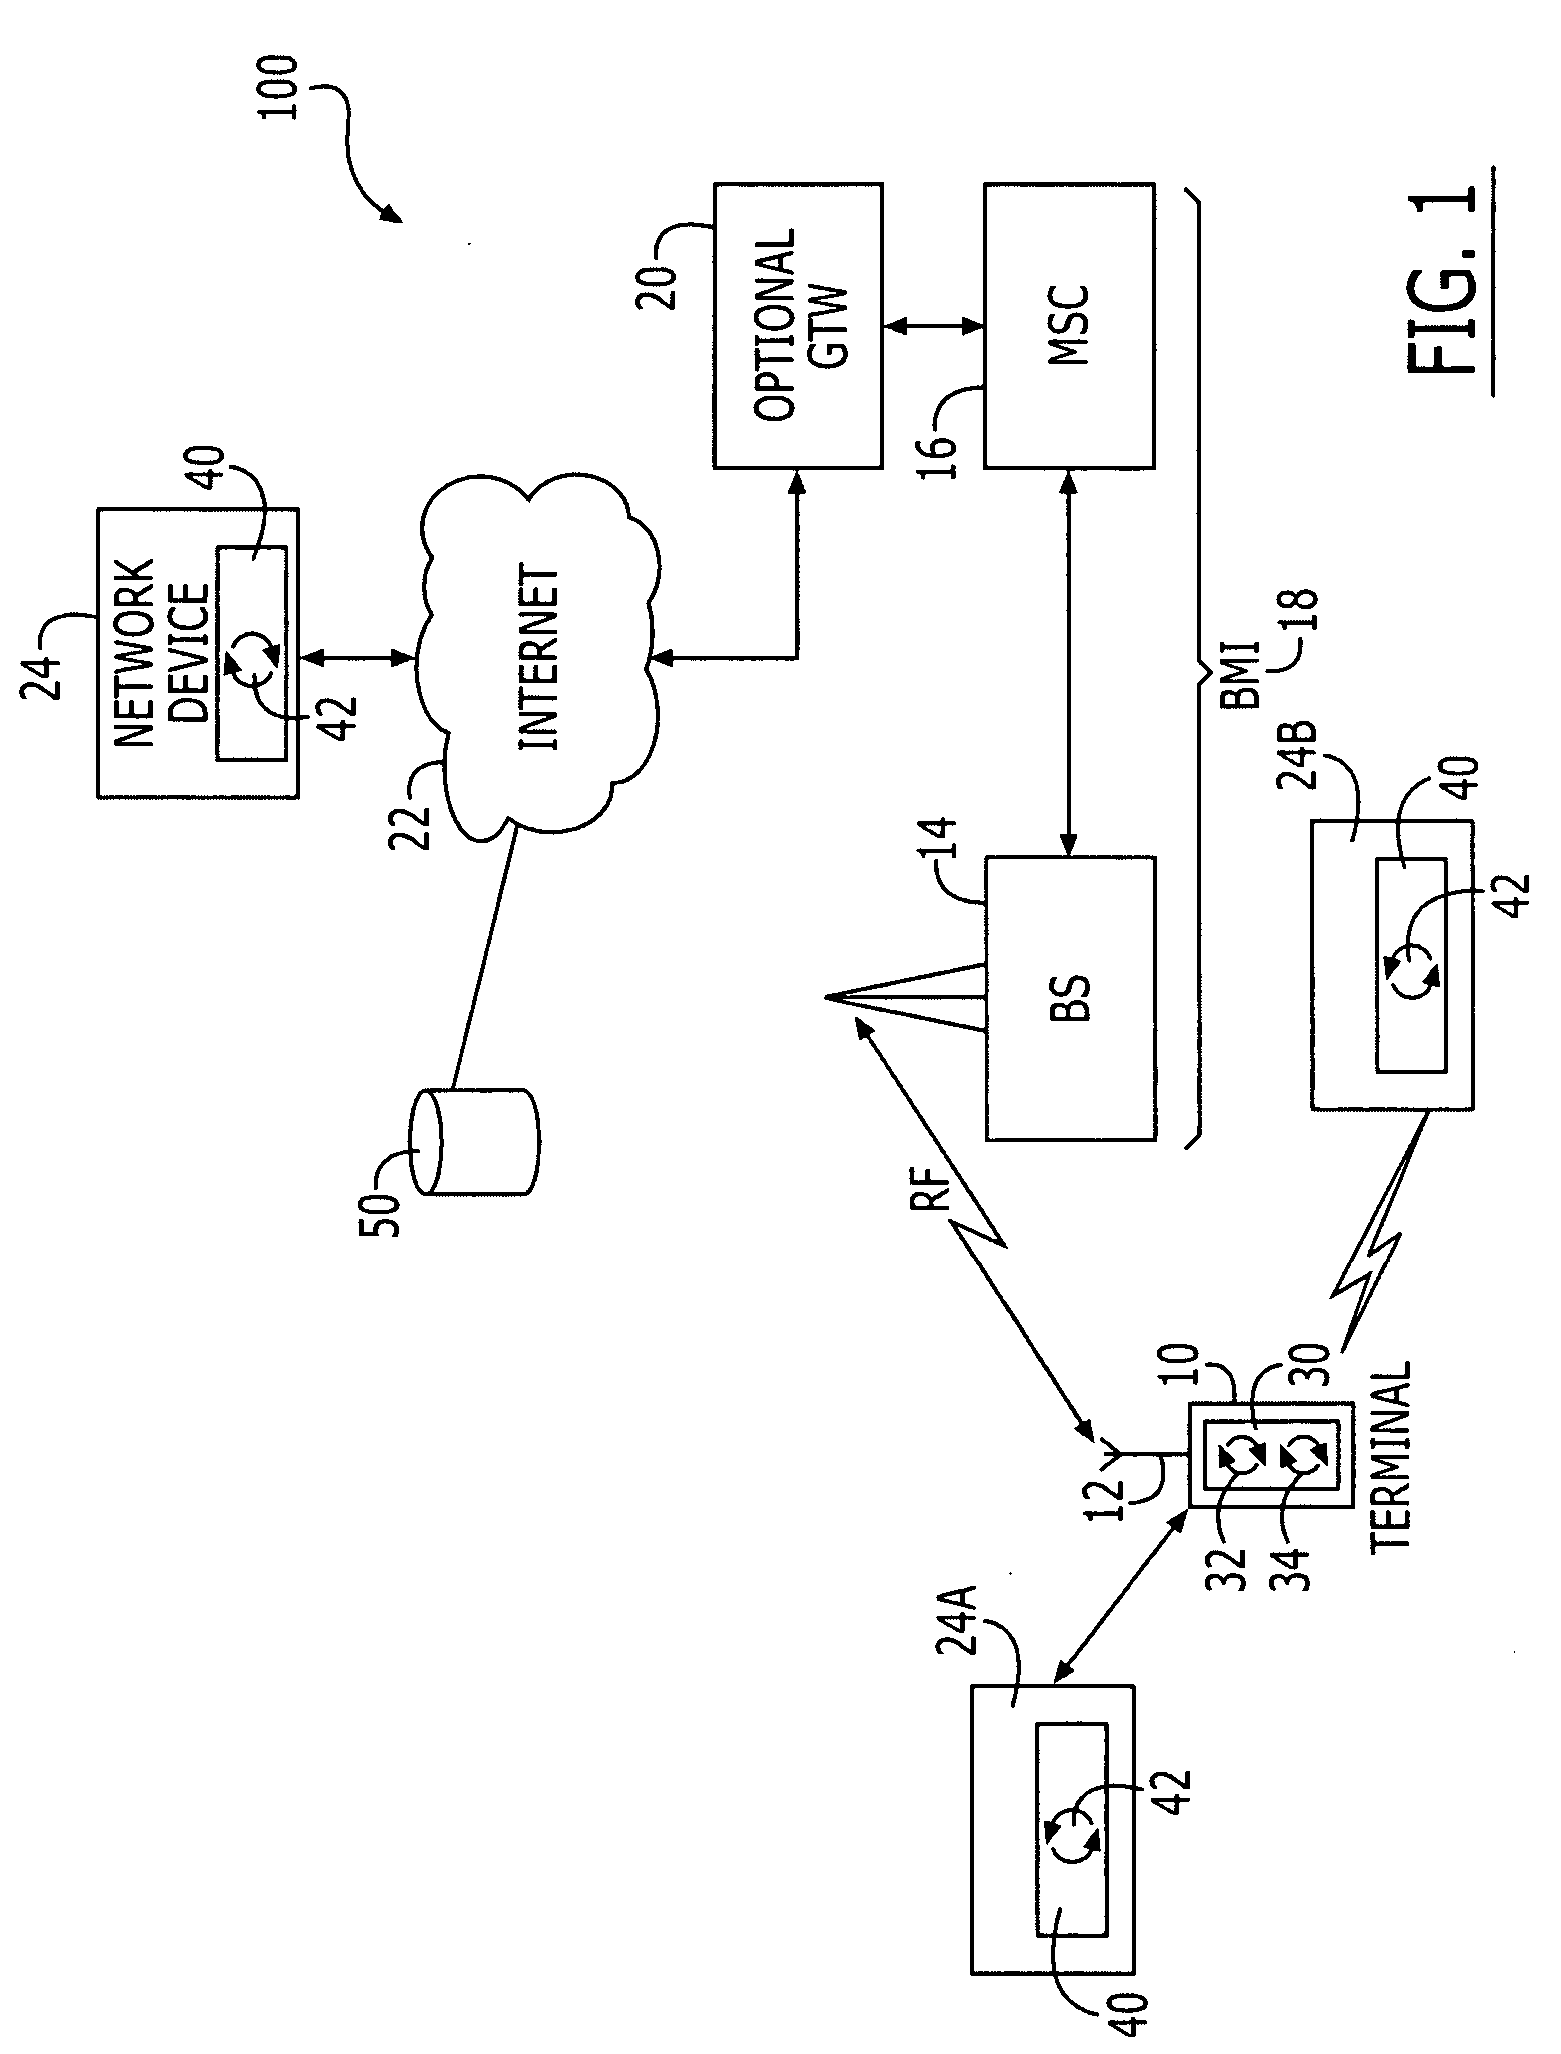 Remote management and access of databases, services and devices associated with a mobile terminal